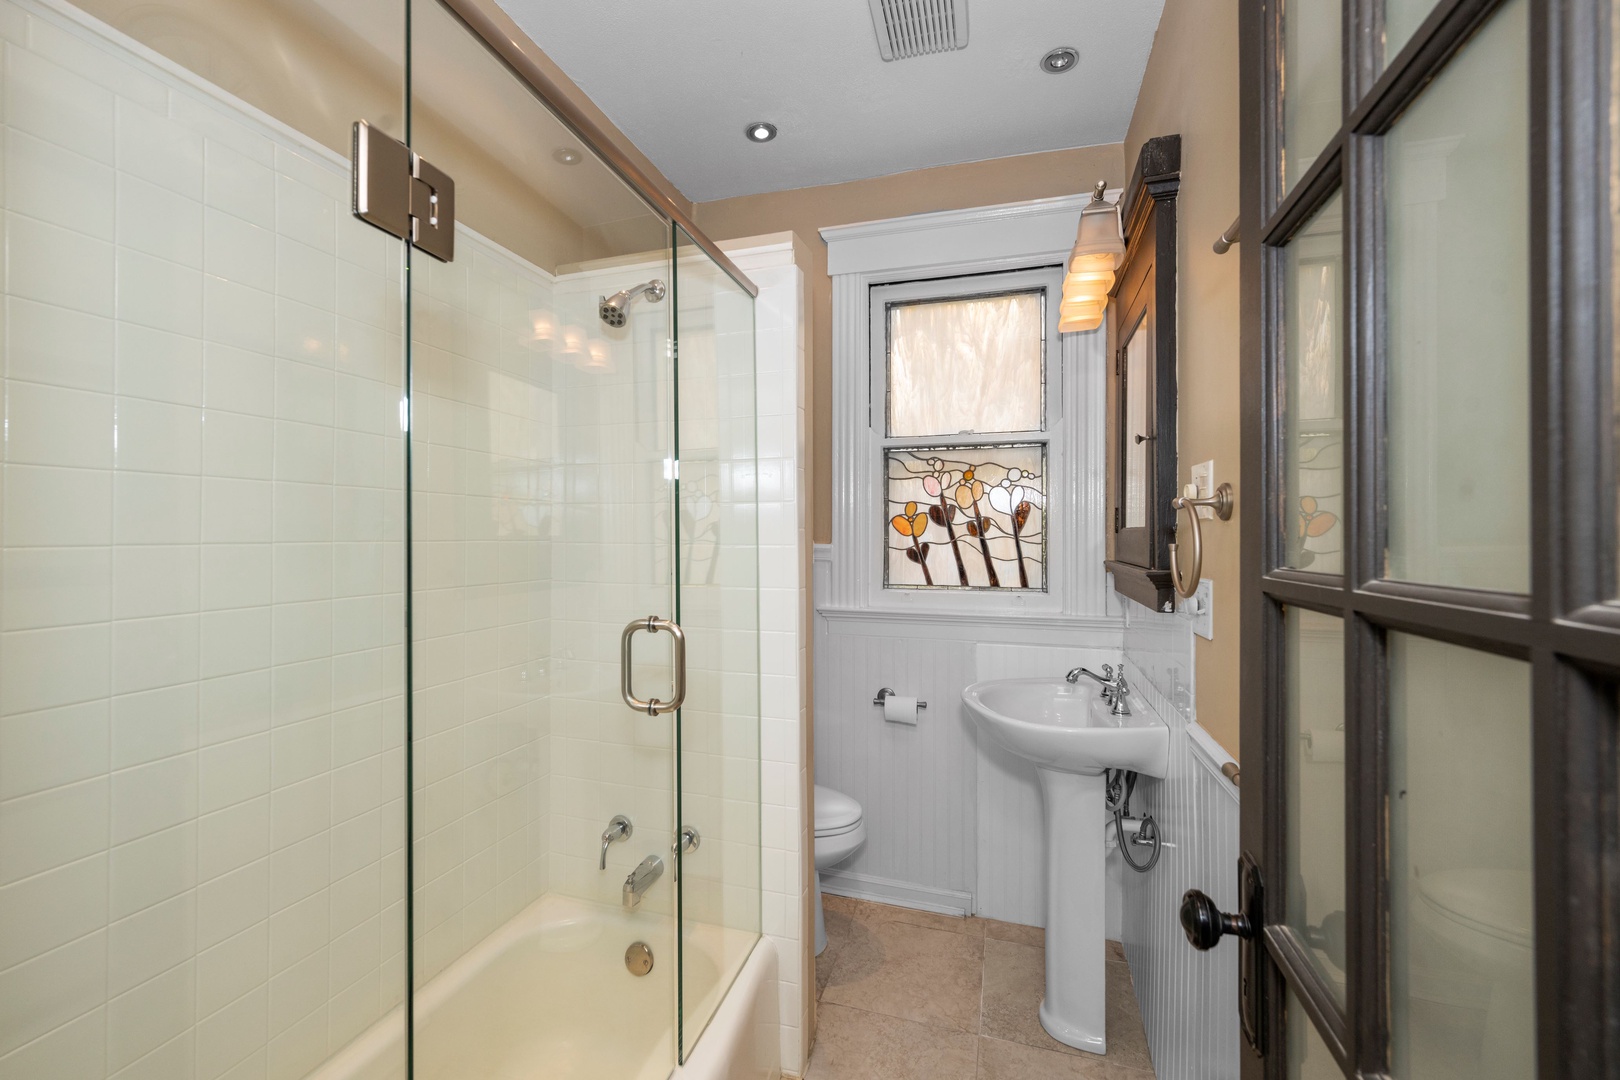 The second-level full bathroom includes a pedestal sink & shower/tub combo